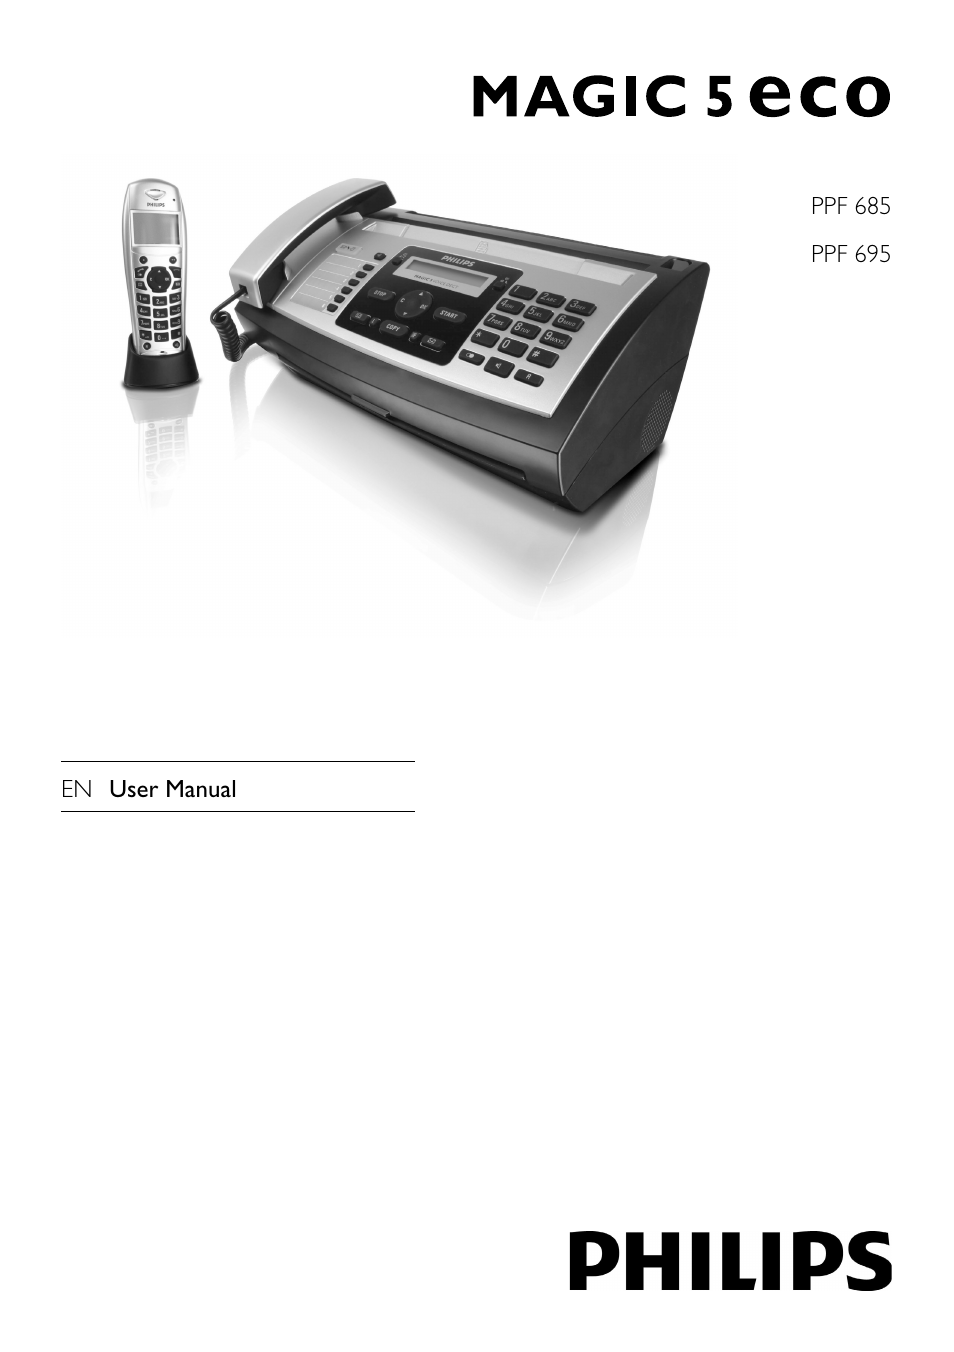 Philips MAGIC 5 ECO PPF 695 User Manual | 56 pages | Also for: MAGIC 5 ECO  PPF 685